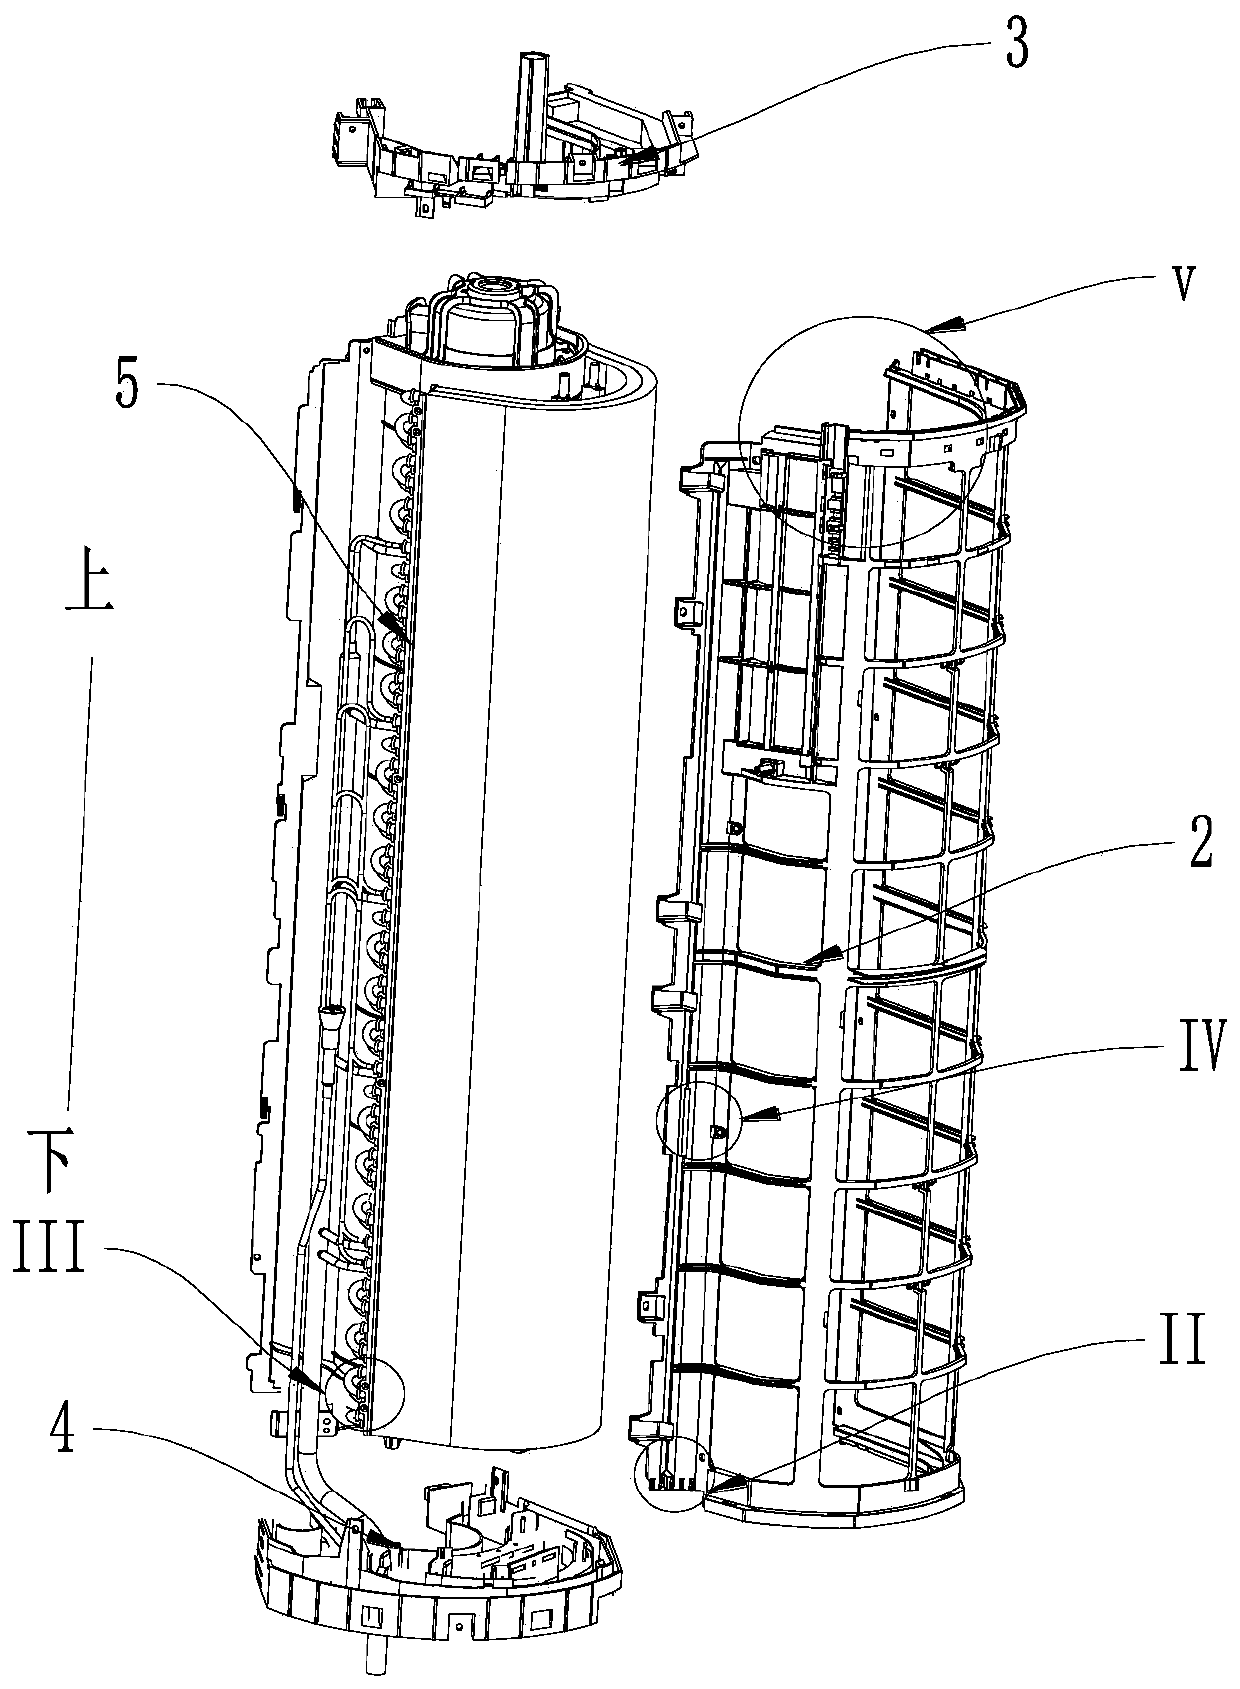 Filter screen, filter screen cleaning device and air conditioner